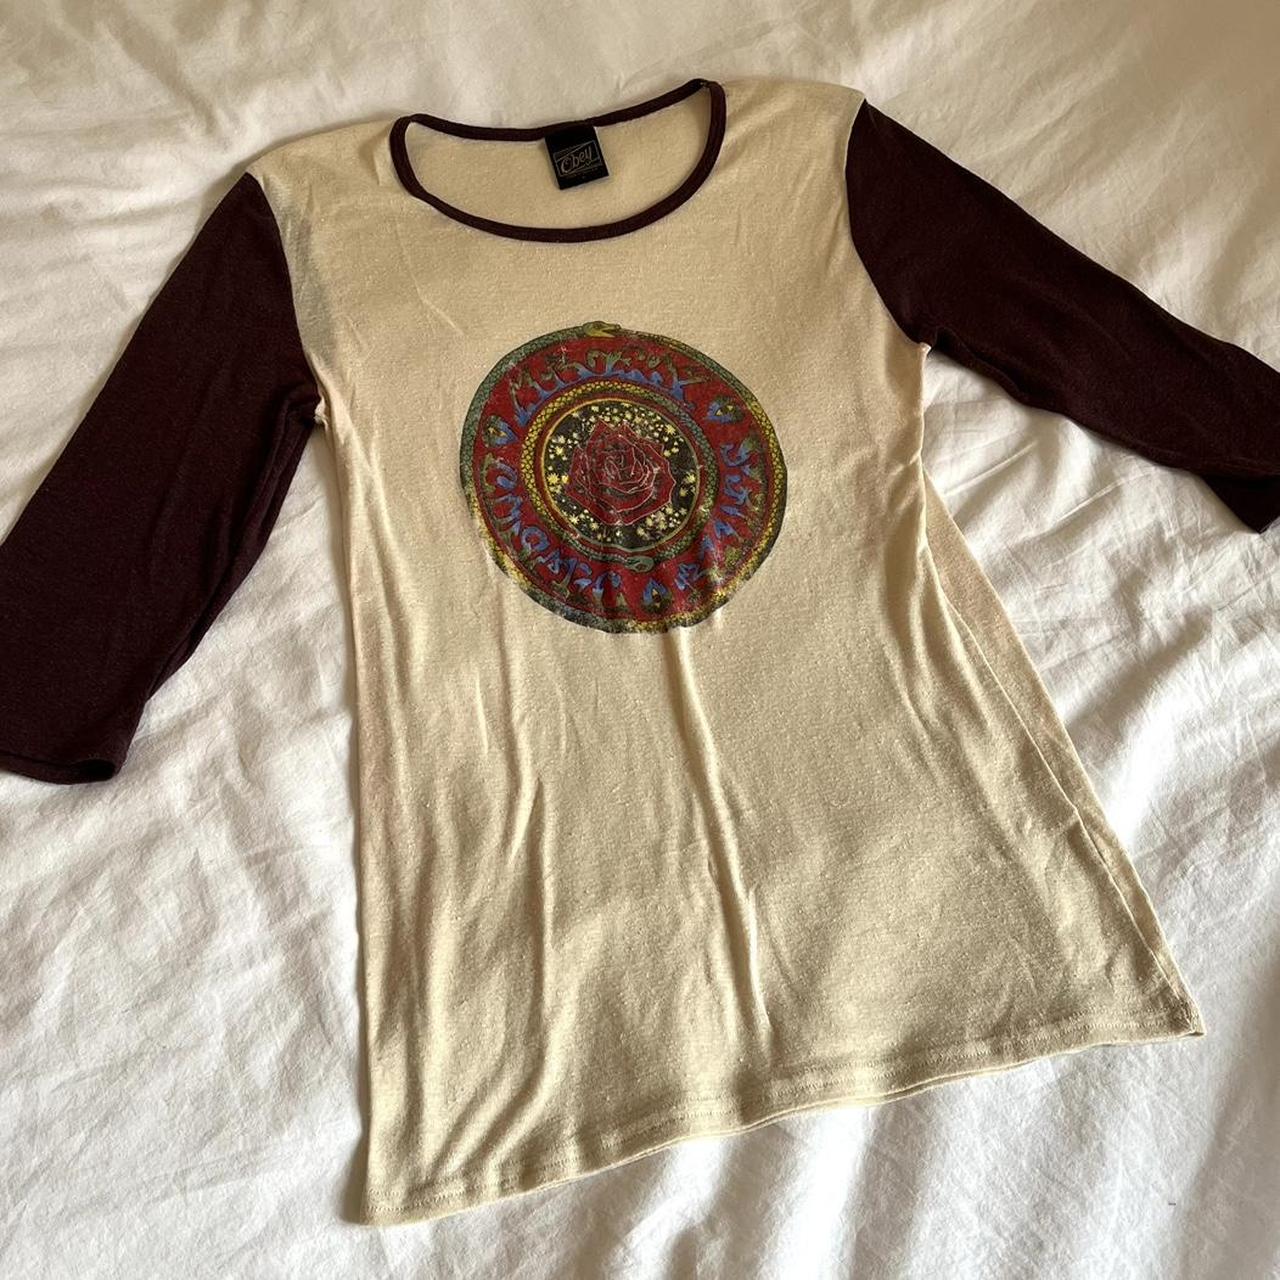 Obey Women's Burgundy and Cream T-shirt (2)